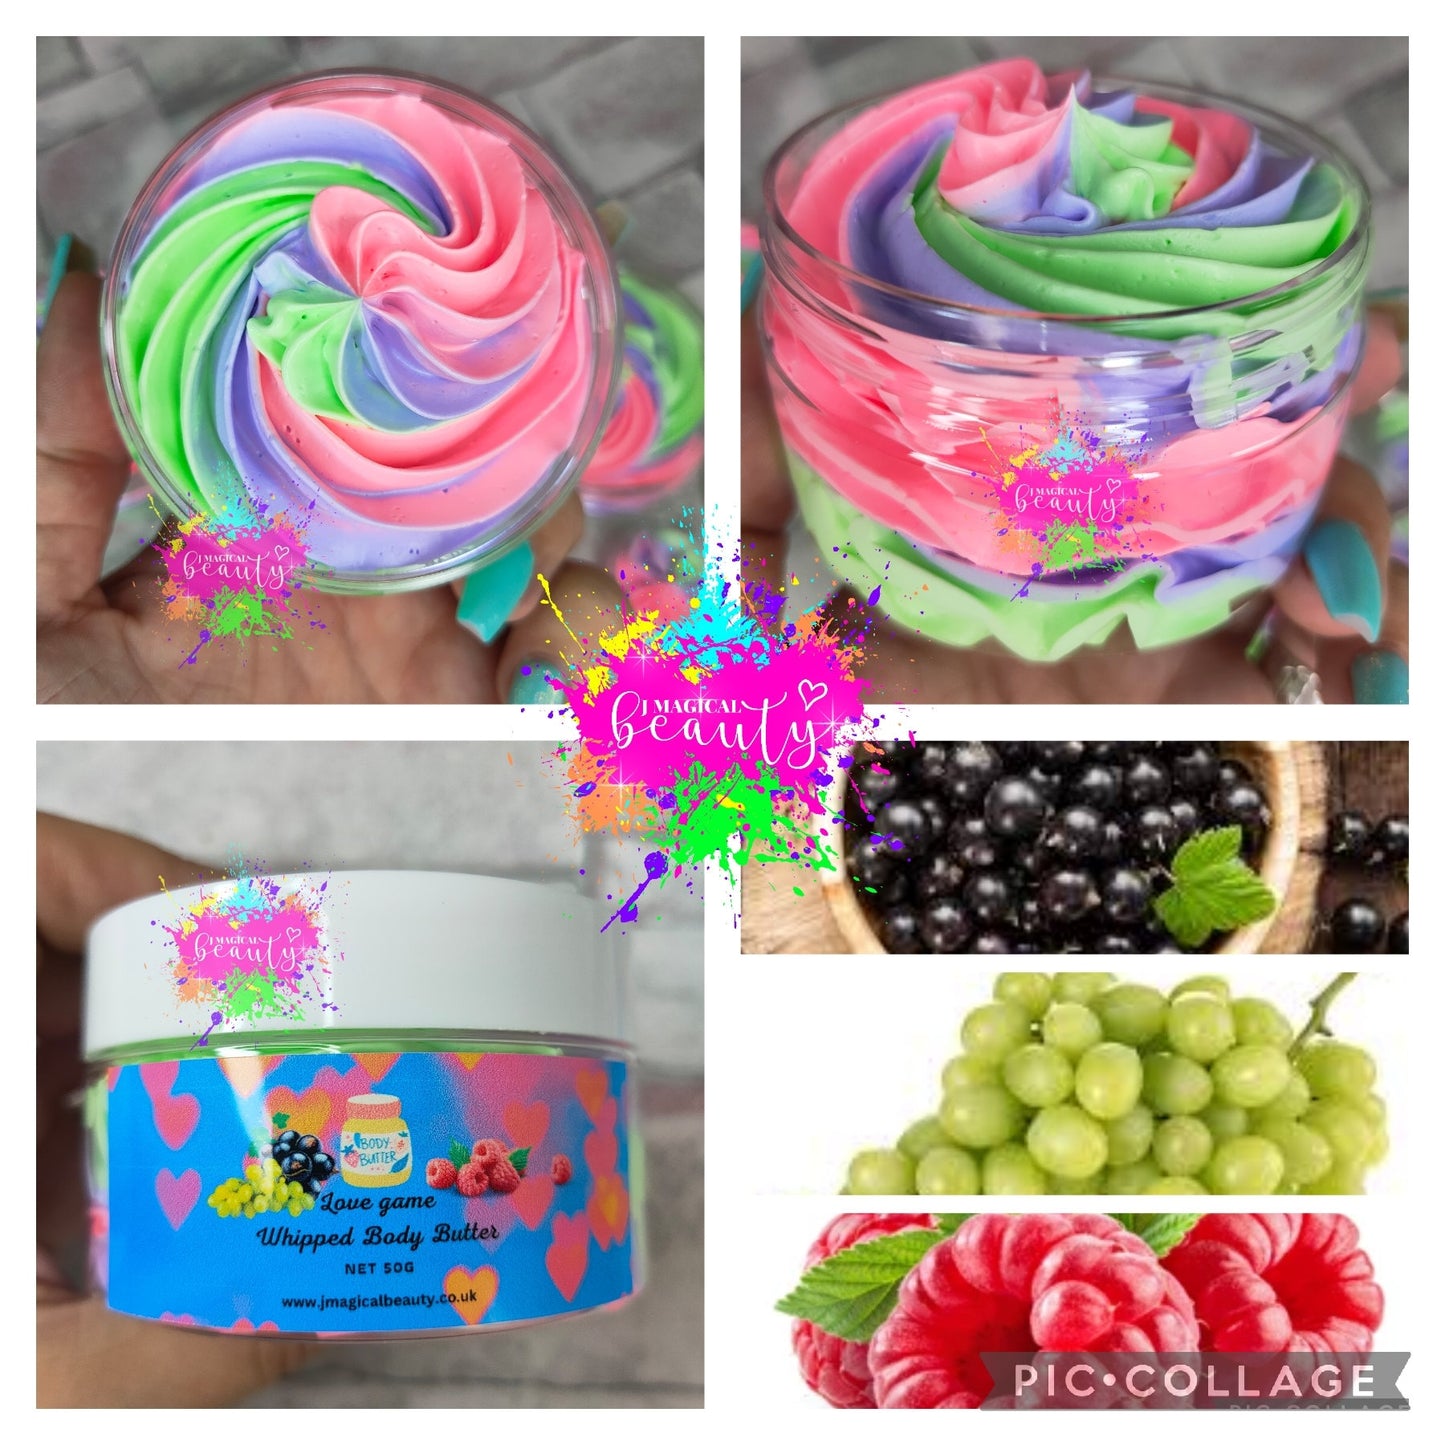 Whipped Body Butter Love Game scent